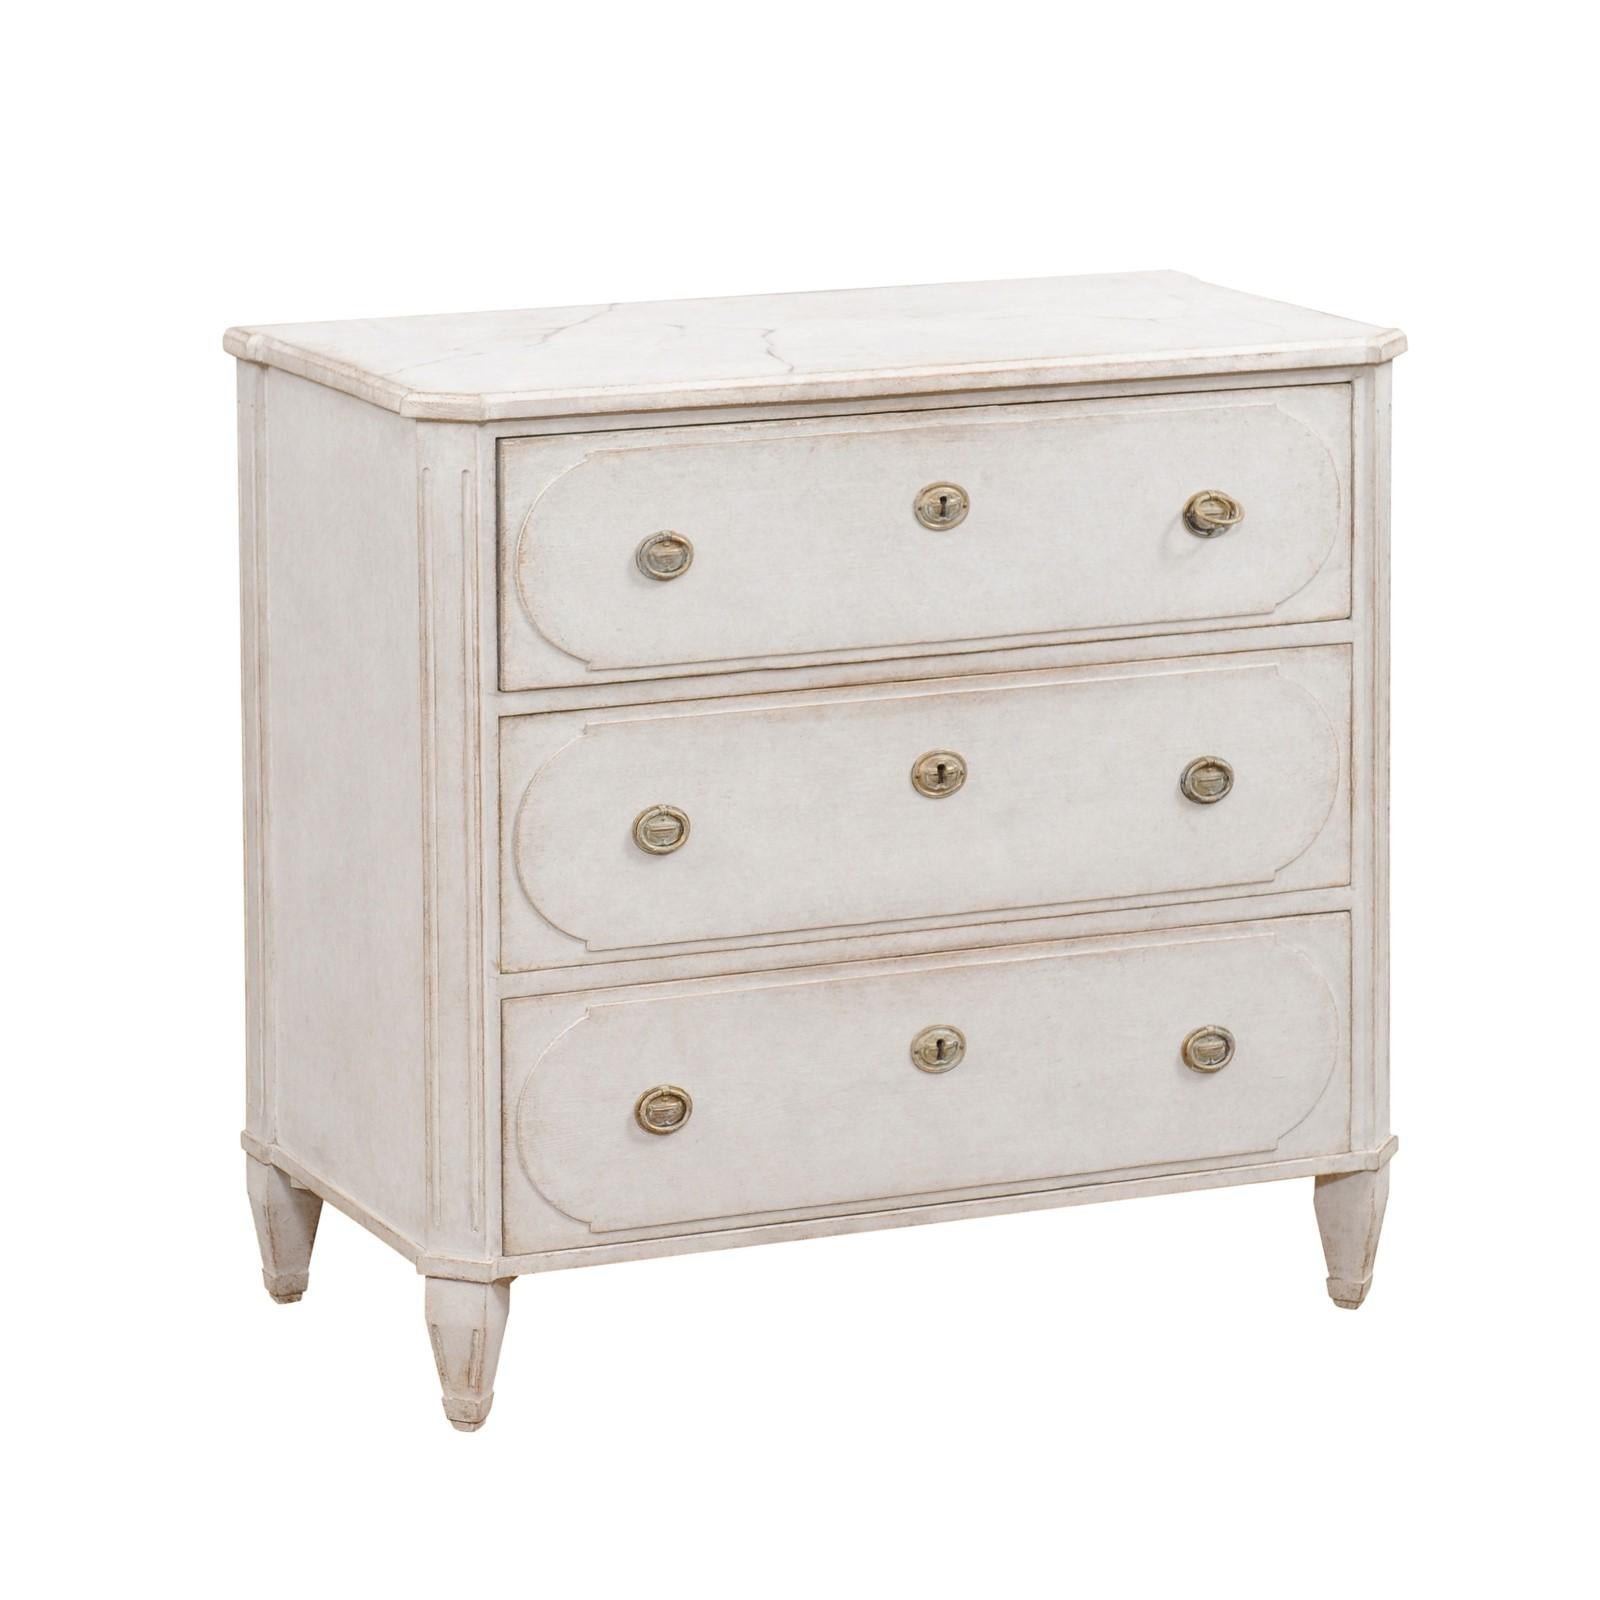 A Swedish Gustavian style three-drawer chest from the 19th century with light gray painted finish, marbleized top and fluted side posts. This 19th-century Swedish Gustavian style chest is a testament to timeless elegance, graced with a light gray